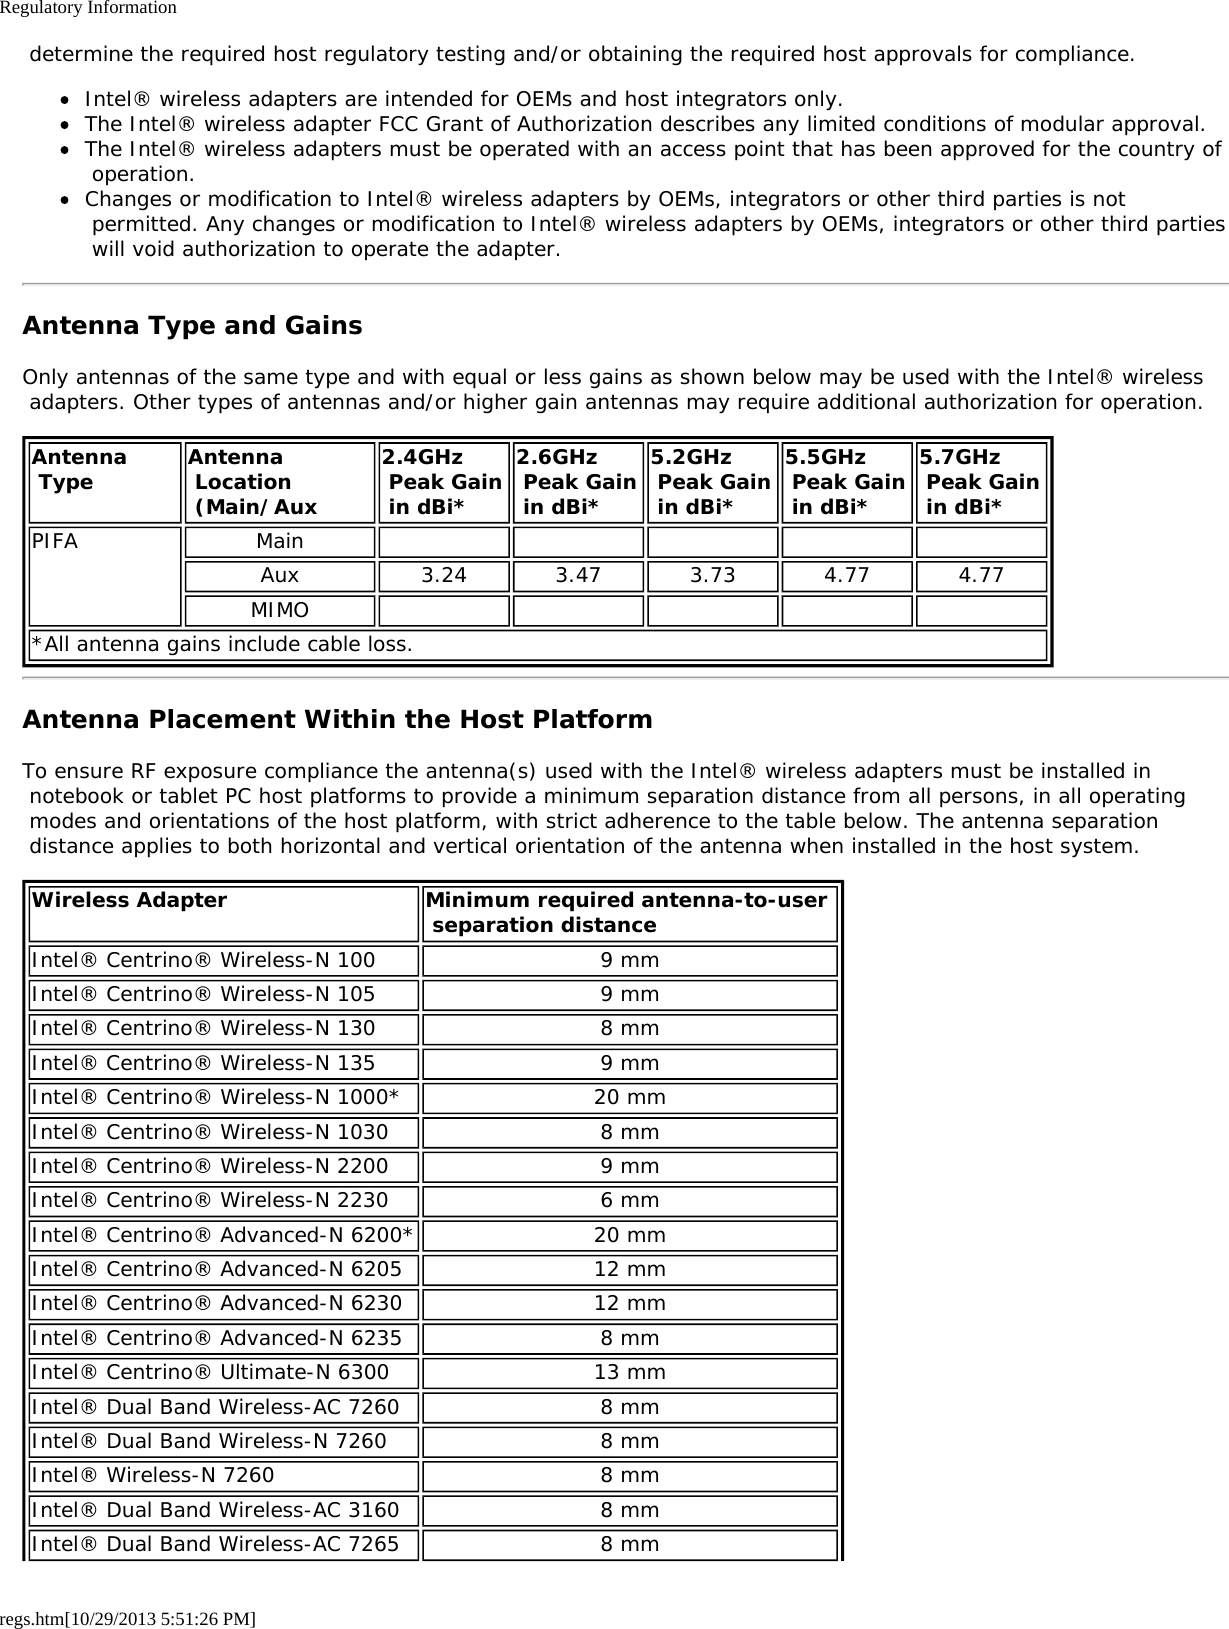 Regulatory Informationregs.htm[10/29/2013 5:51:26 PM] determine the required host regulatory testing and/or obtaining the required host approvals for compliance.Intel® wireless adapters are intended for OEMs and host integrators only.The Intel® wireless adapter FCC Grant of Authorization describes any limited conditions of modular approval.The Intel® wireless adapters must be operated with an access point that has been approved for the country of operation.Changes or modification to Intel® wireless adapters by OEMs, integrators or other third parties is not permitted. Any changes or modification to Intel® wireless adapters by OEMs, integrators or other third parties will void authorization to operate the adapter.Antenna Type and GainsOnly antennas of the same type and with equal or less gains as shown below may be used with the Intel® wireless adapters. Other types of antennas and/or higher gain antennas may require additional authorization for operation.Antenna Type Antenna Location (Main/Aux2.4GHz Peak Gain in dBi*2.6GHz Peak Gain in dBi*5.2GHz Peak Gain in dBi*5.5GHz Peak Gain in dBi*5.7GHz  Peak Gain in dBi*PIFA MainAux 3.24 3.47 3.73 4.77 4.77MIMO*All antenna gains include cable loss.Antenna Placement Within the Host PlatformTo ensure RF exposure compliance the antenna(s) used with the Intel® wireless adapters must be installed in notebook or tablet PC host platforms to provide a minimum separation distance from all persons, in all operating modes and orientations of the host platform, with strict adherence to the table below. The antenna separation distance applies to both horizontal and vertical orientation of the antenna when installed in the host system.Wireless Adapter Minimum required antenna-to-user  separation distanceIntel® Centrino® Wireless-N 100 9 mmIntel® Centrino® Wireless-N 105 9 mmIntel® Centrino® Wireless-N 130 8 mmIntel® Centrino® Wireless-N 135 9 mmIntel® Centrino® Wireless-N 1000* 20 mmIntel® Centrino® Wireless-N 1030 8 mmIntel® Centrino® Wireless-N 2200 9 mmIntel® Centrino® Wireless-N 2230 6 mmIntel® Centrino® Advanced-N 6200* 20 mmIntel® Centrino® Advanced-N 6205 12 mmIntel® Centrino® Advanced-N 6230 12 mmIntel® Centrino® Advanced-N 6235 8 mmIntel® Centrino® Ultimate-N 6300 13 mmIntel® Dual Band Wireless-AC 7260 8 mmIntel® Dual Band Wireless-N 7260 8 mmIntel® Wireless-N 7260 8 mmIntel® Dual Band Wireless-AC 3160 8 mmIntel® Dual Band Wireless-AC 7265 8 mm